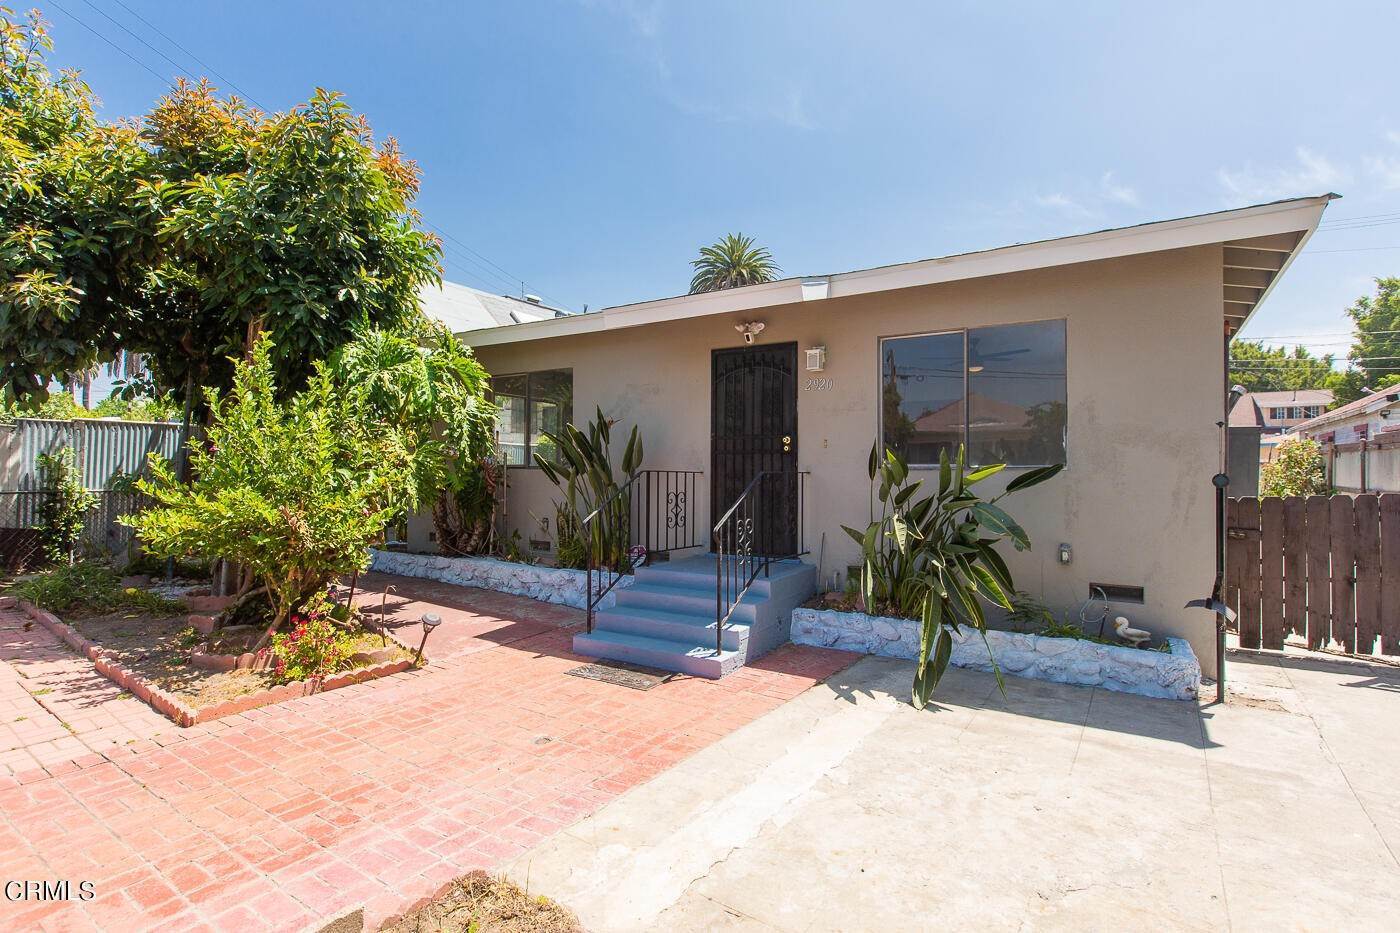 Duplex Homes for Sale at 2920 Pasadena Avenue Los Angeles, California 90031 United States